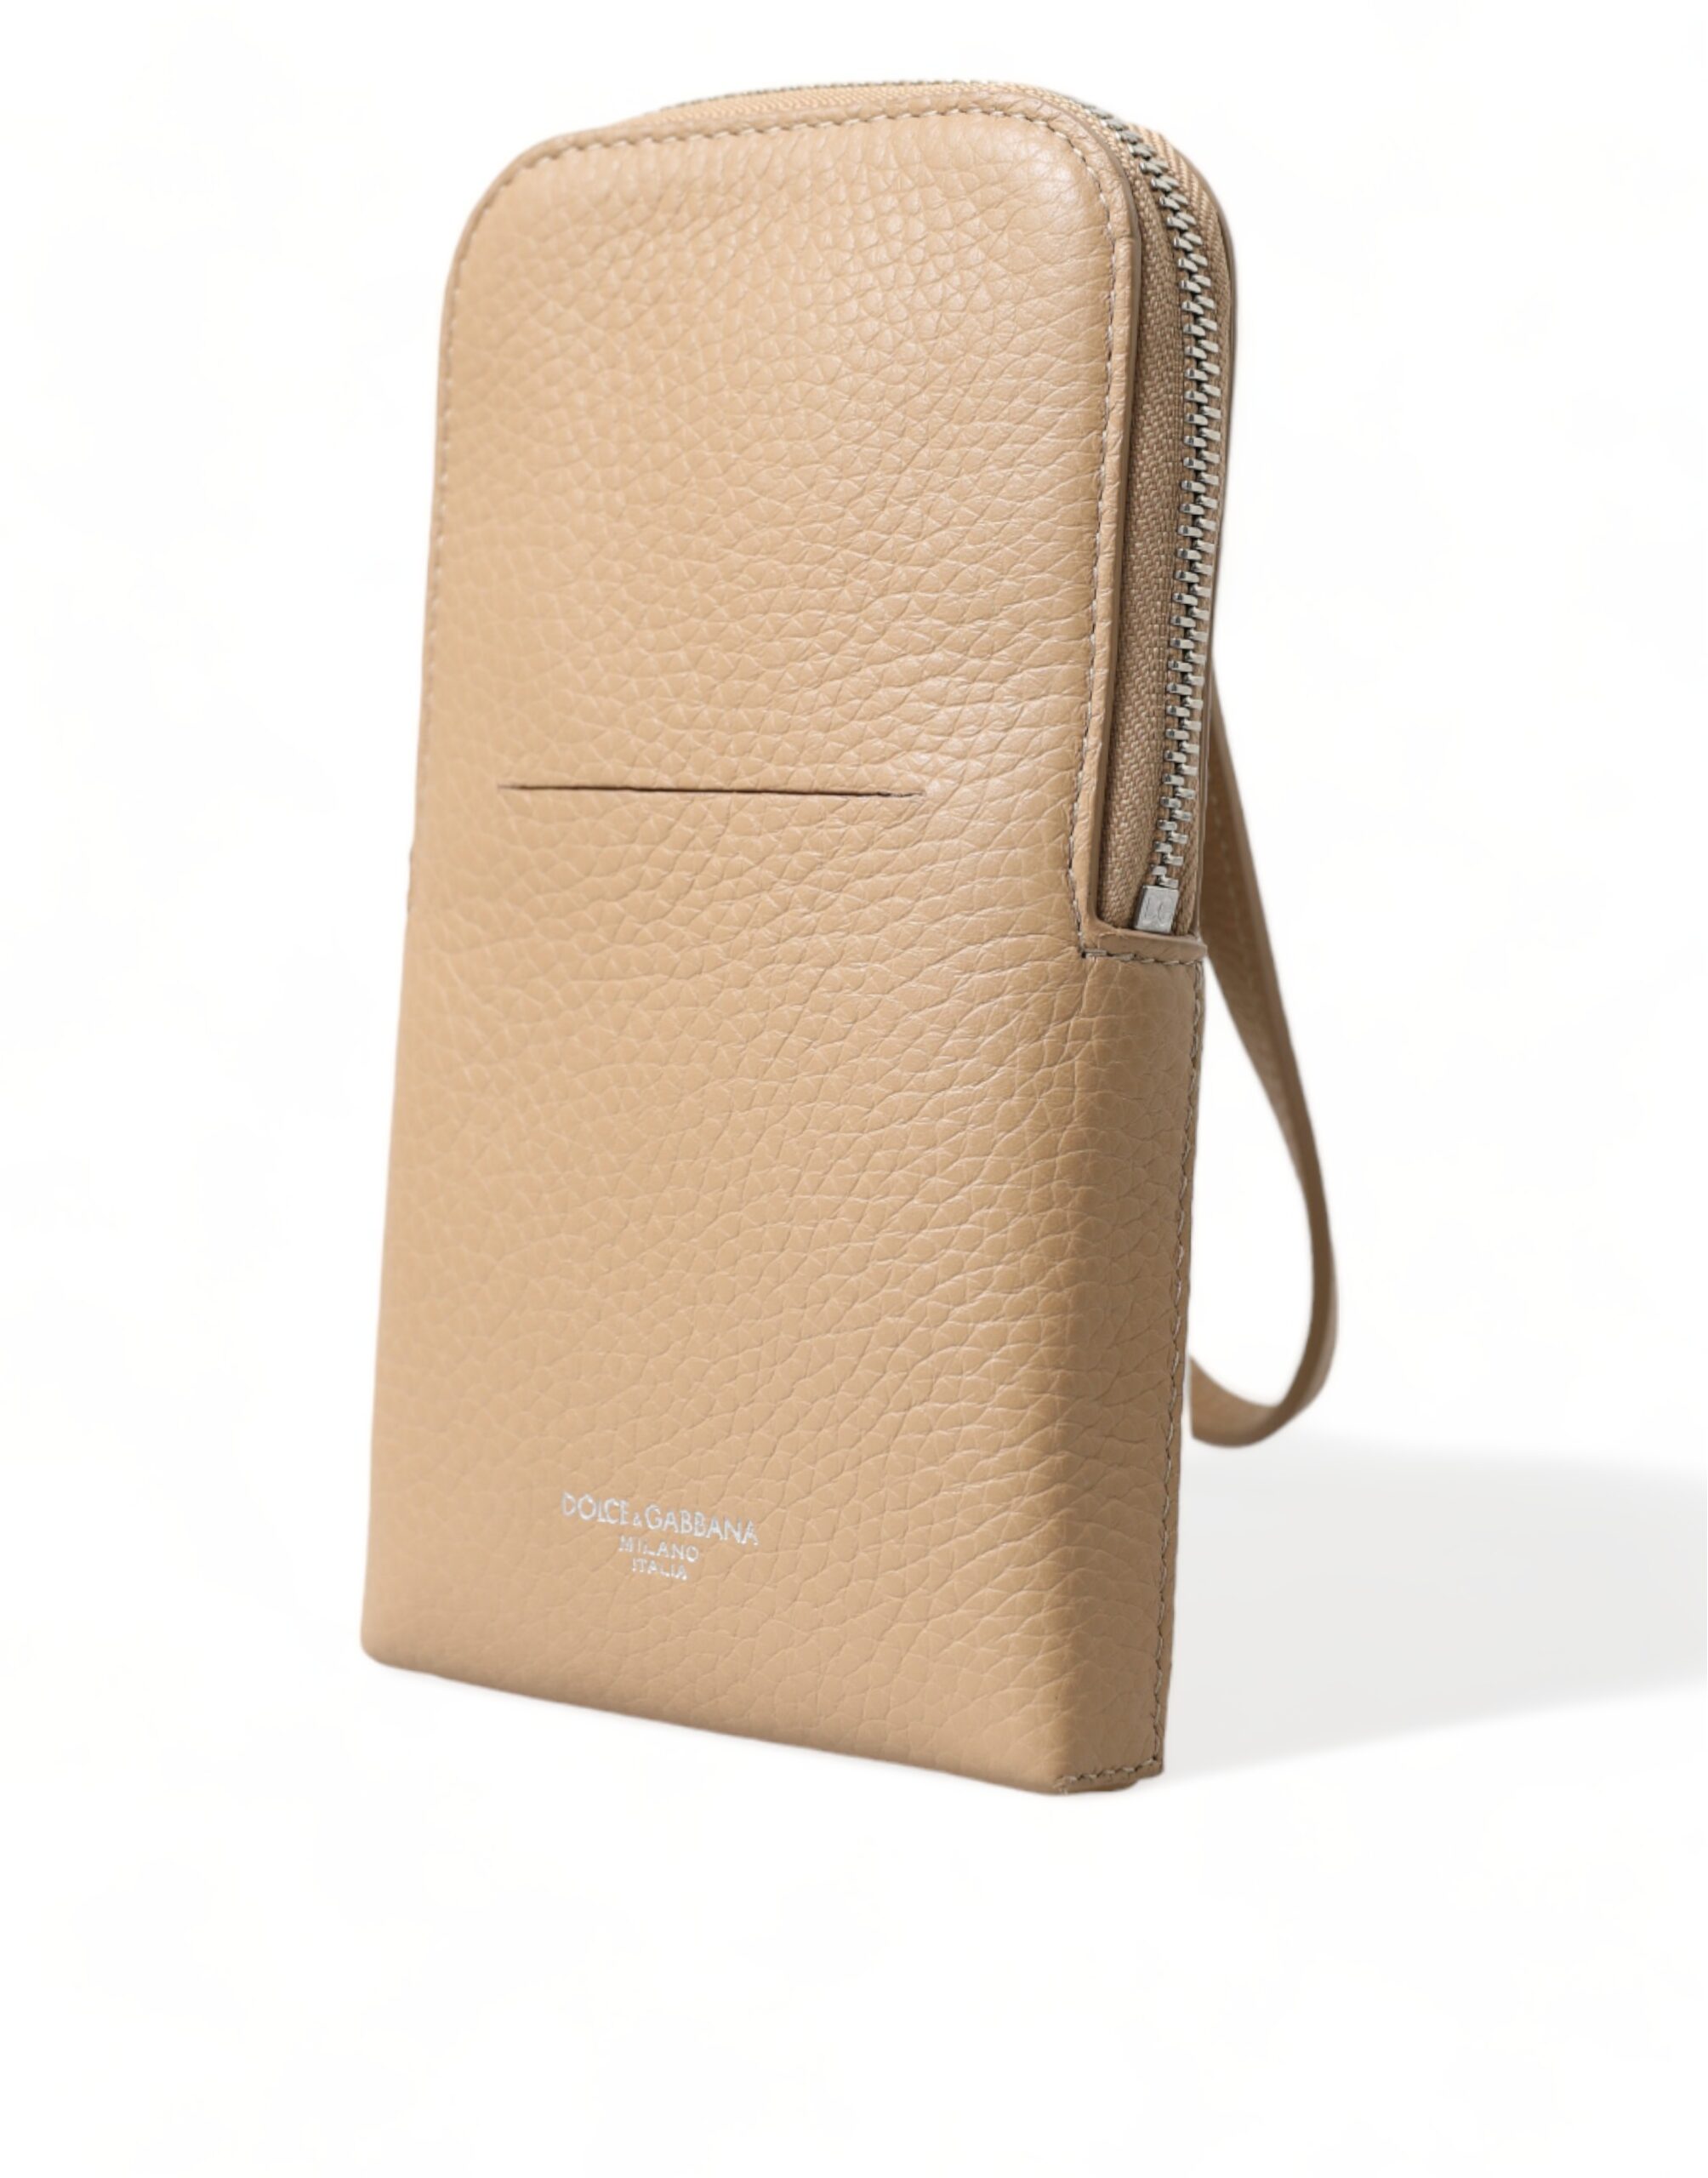 Leather Crossbody Phone Bag with Zipper Closure and Logo Details